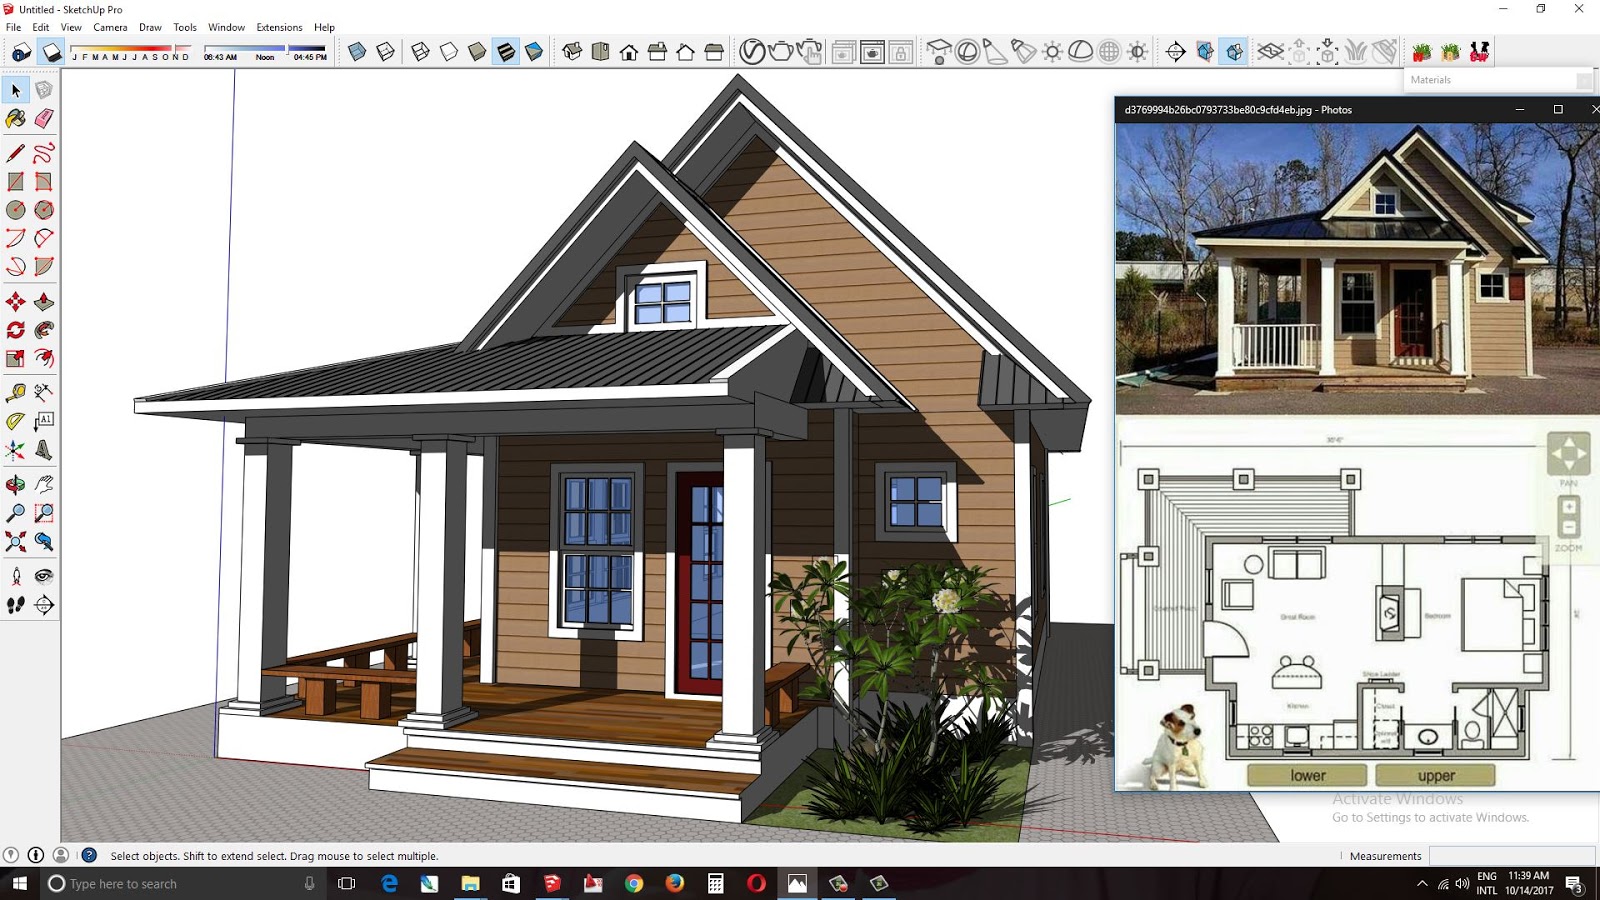 Sketchup Modeling One Bedroom House  Plan  From Photo H01 